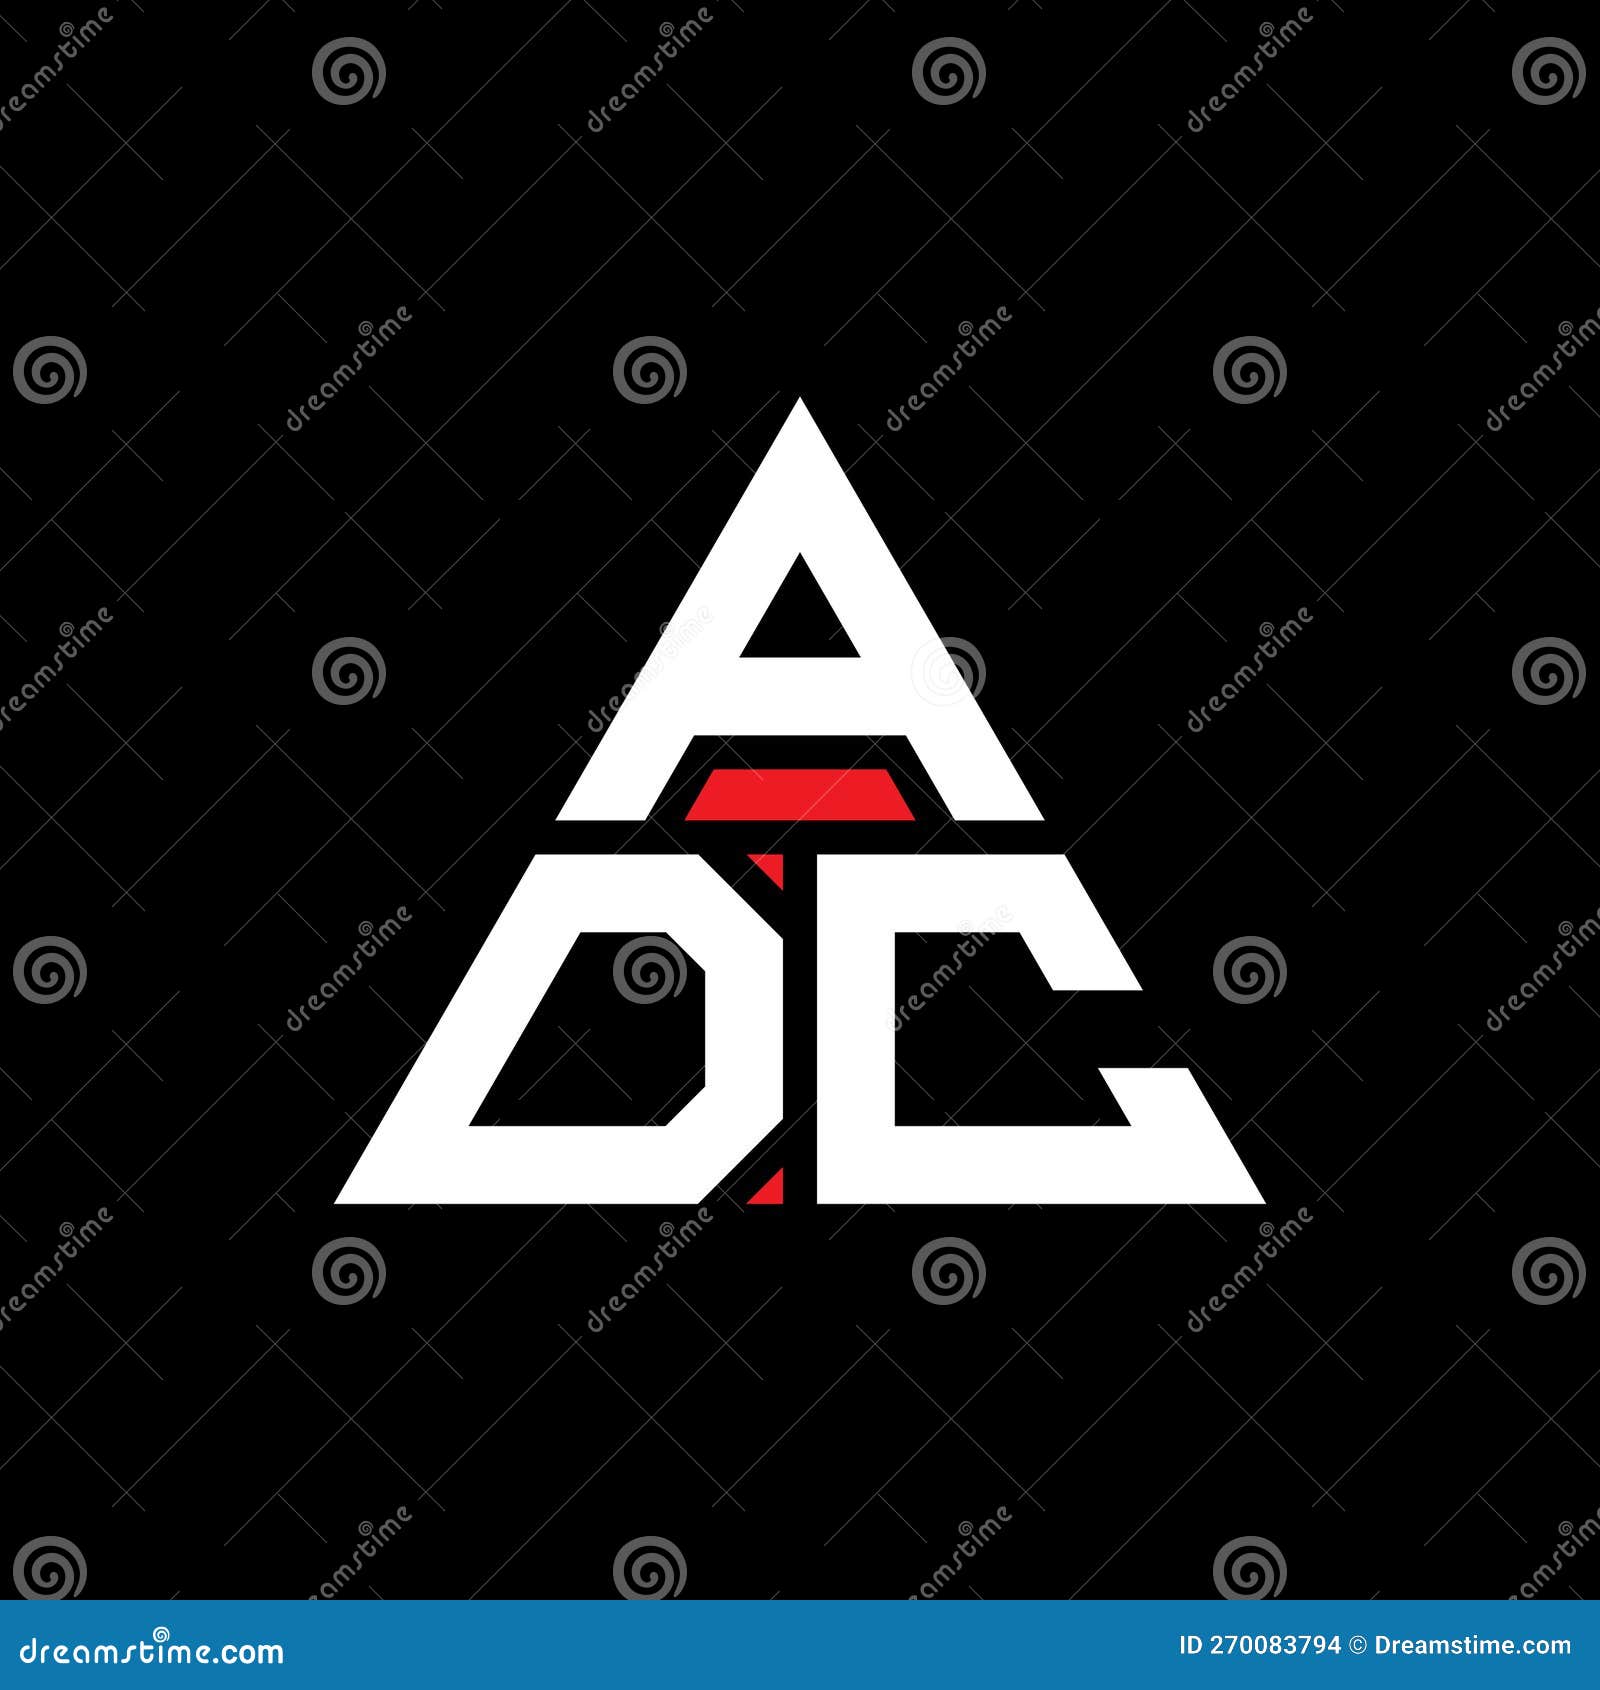 adc triangle letter logo  with triangle . adc triangle logo  monogram. adc triangle  logo template with red